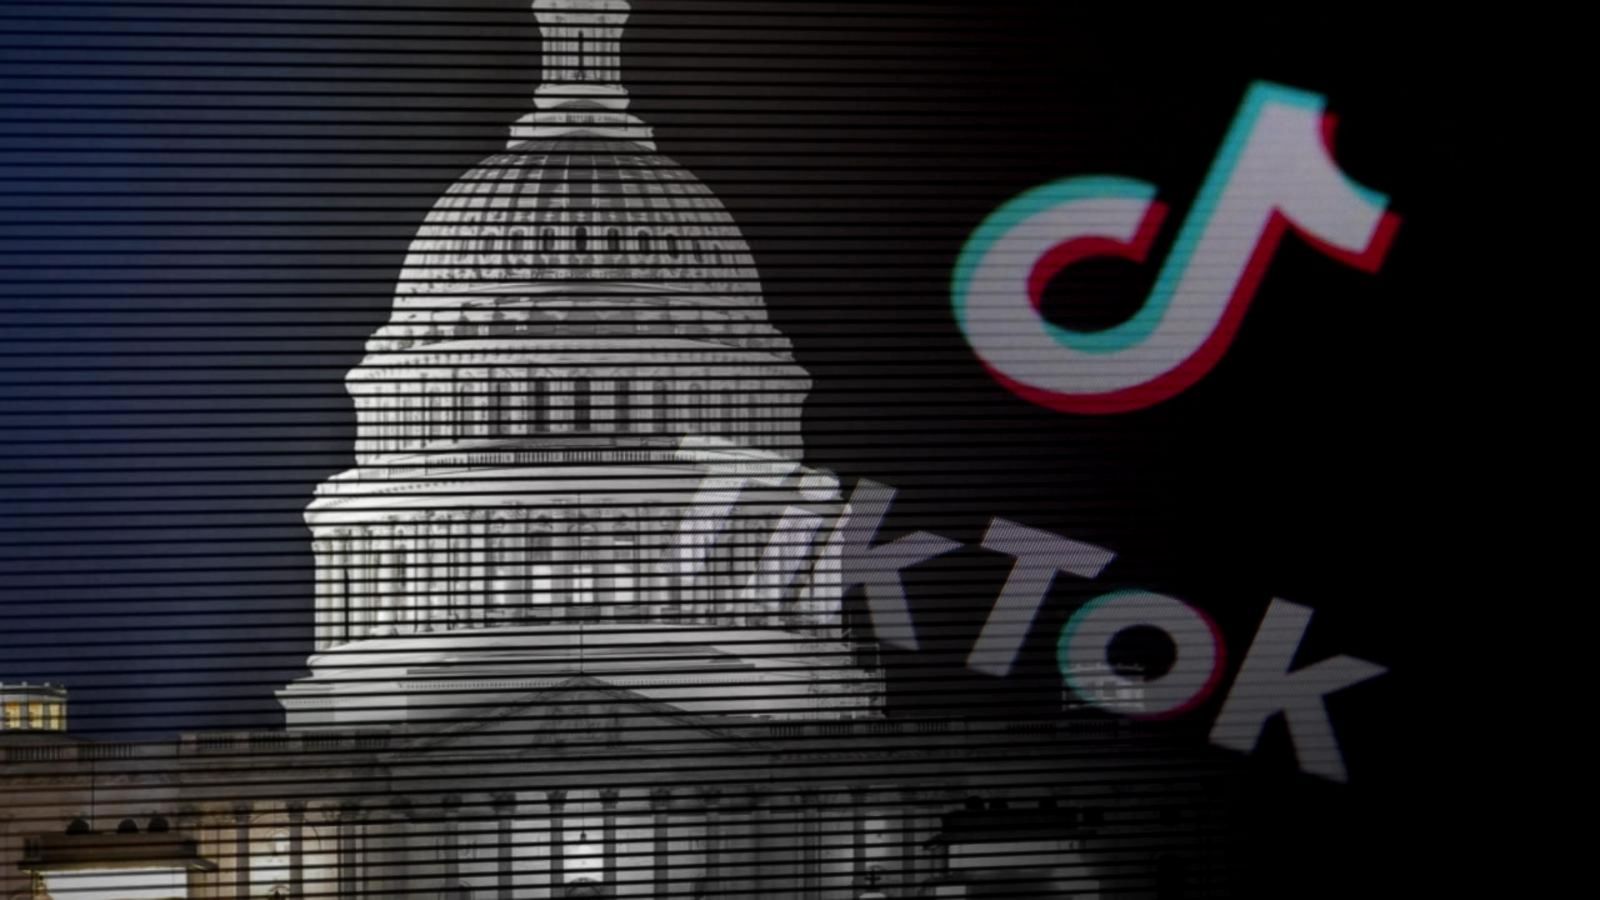 Tik Tok app reportedly under national security review - Good Morning ...